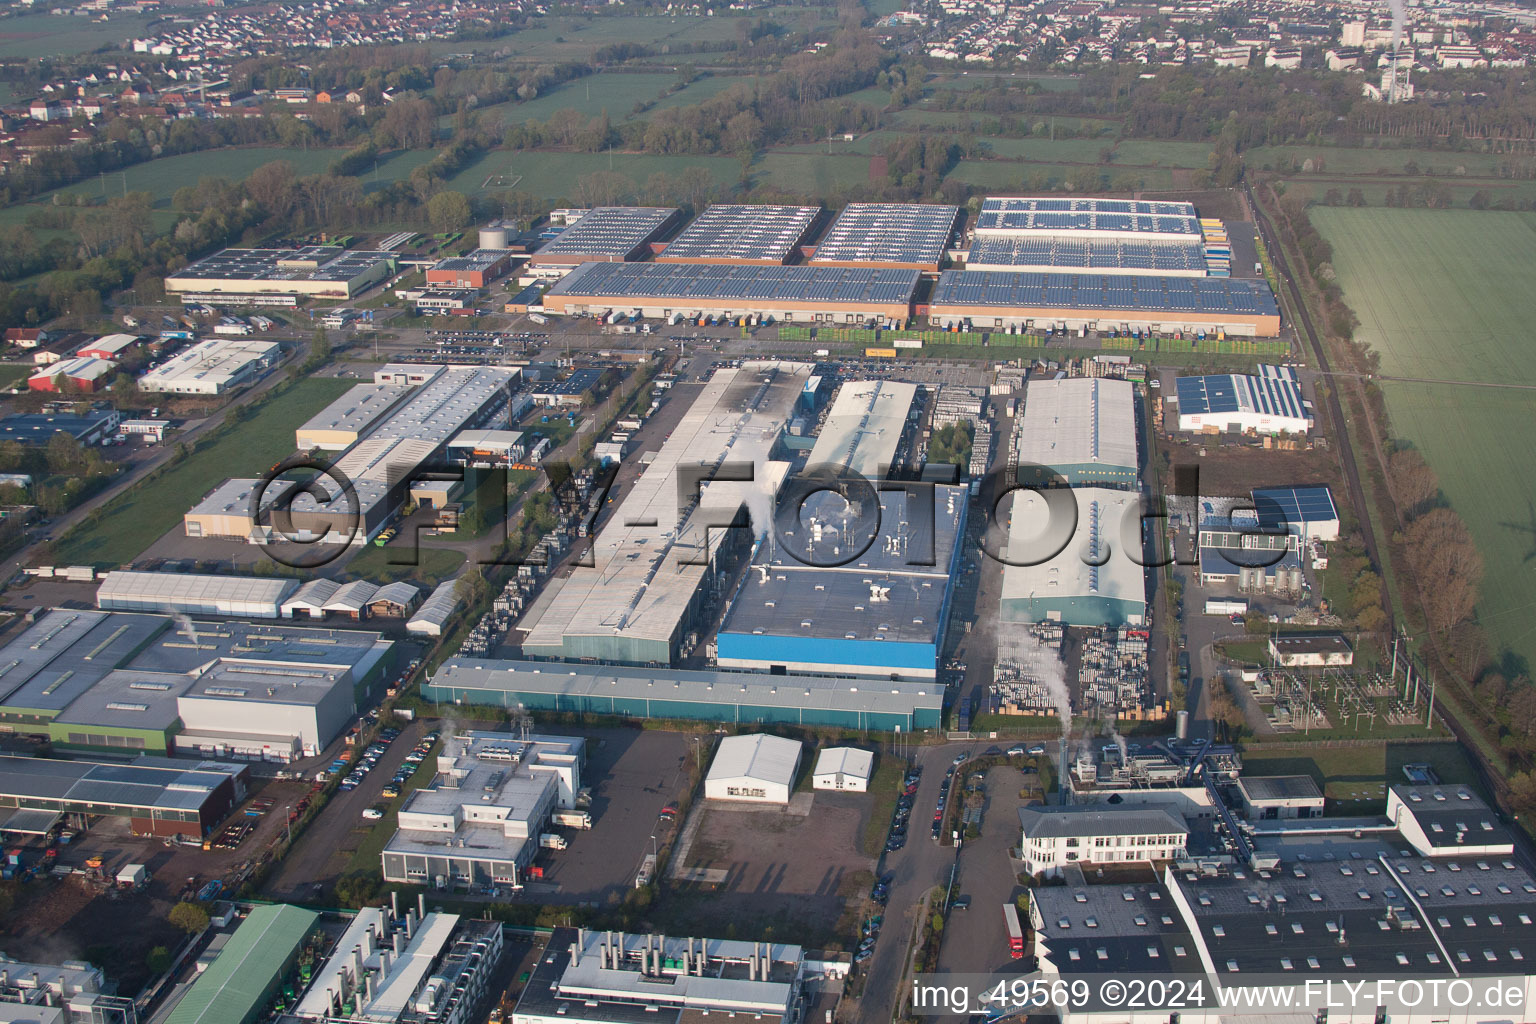 Drone recording of Industrial area in Offenbach an der Queich in the state Rhineland-Palatinate, Germany